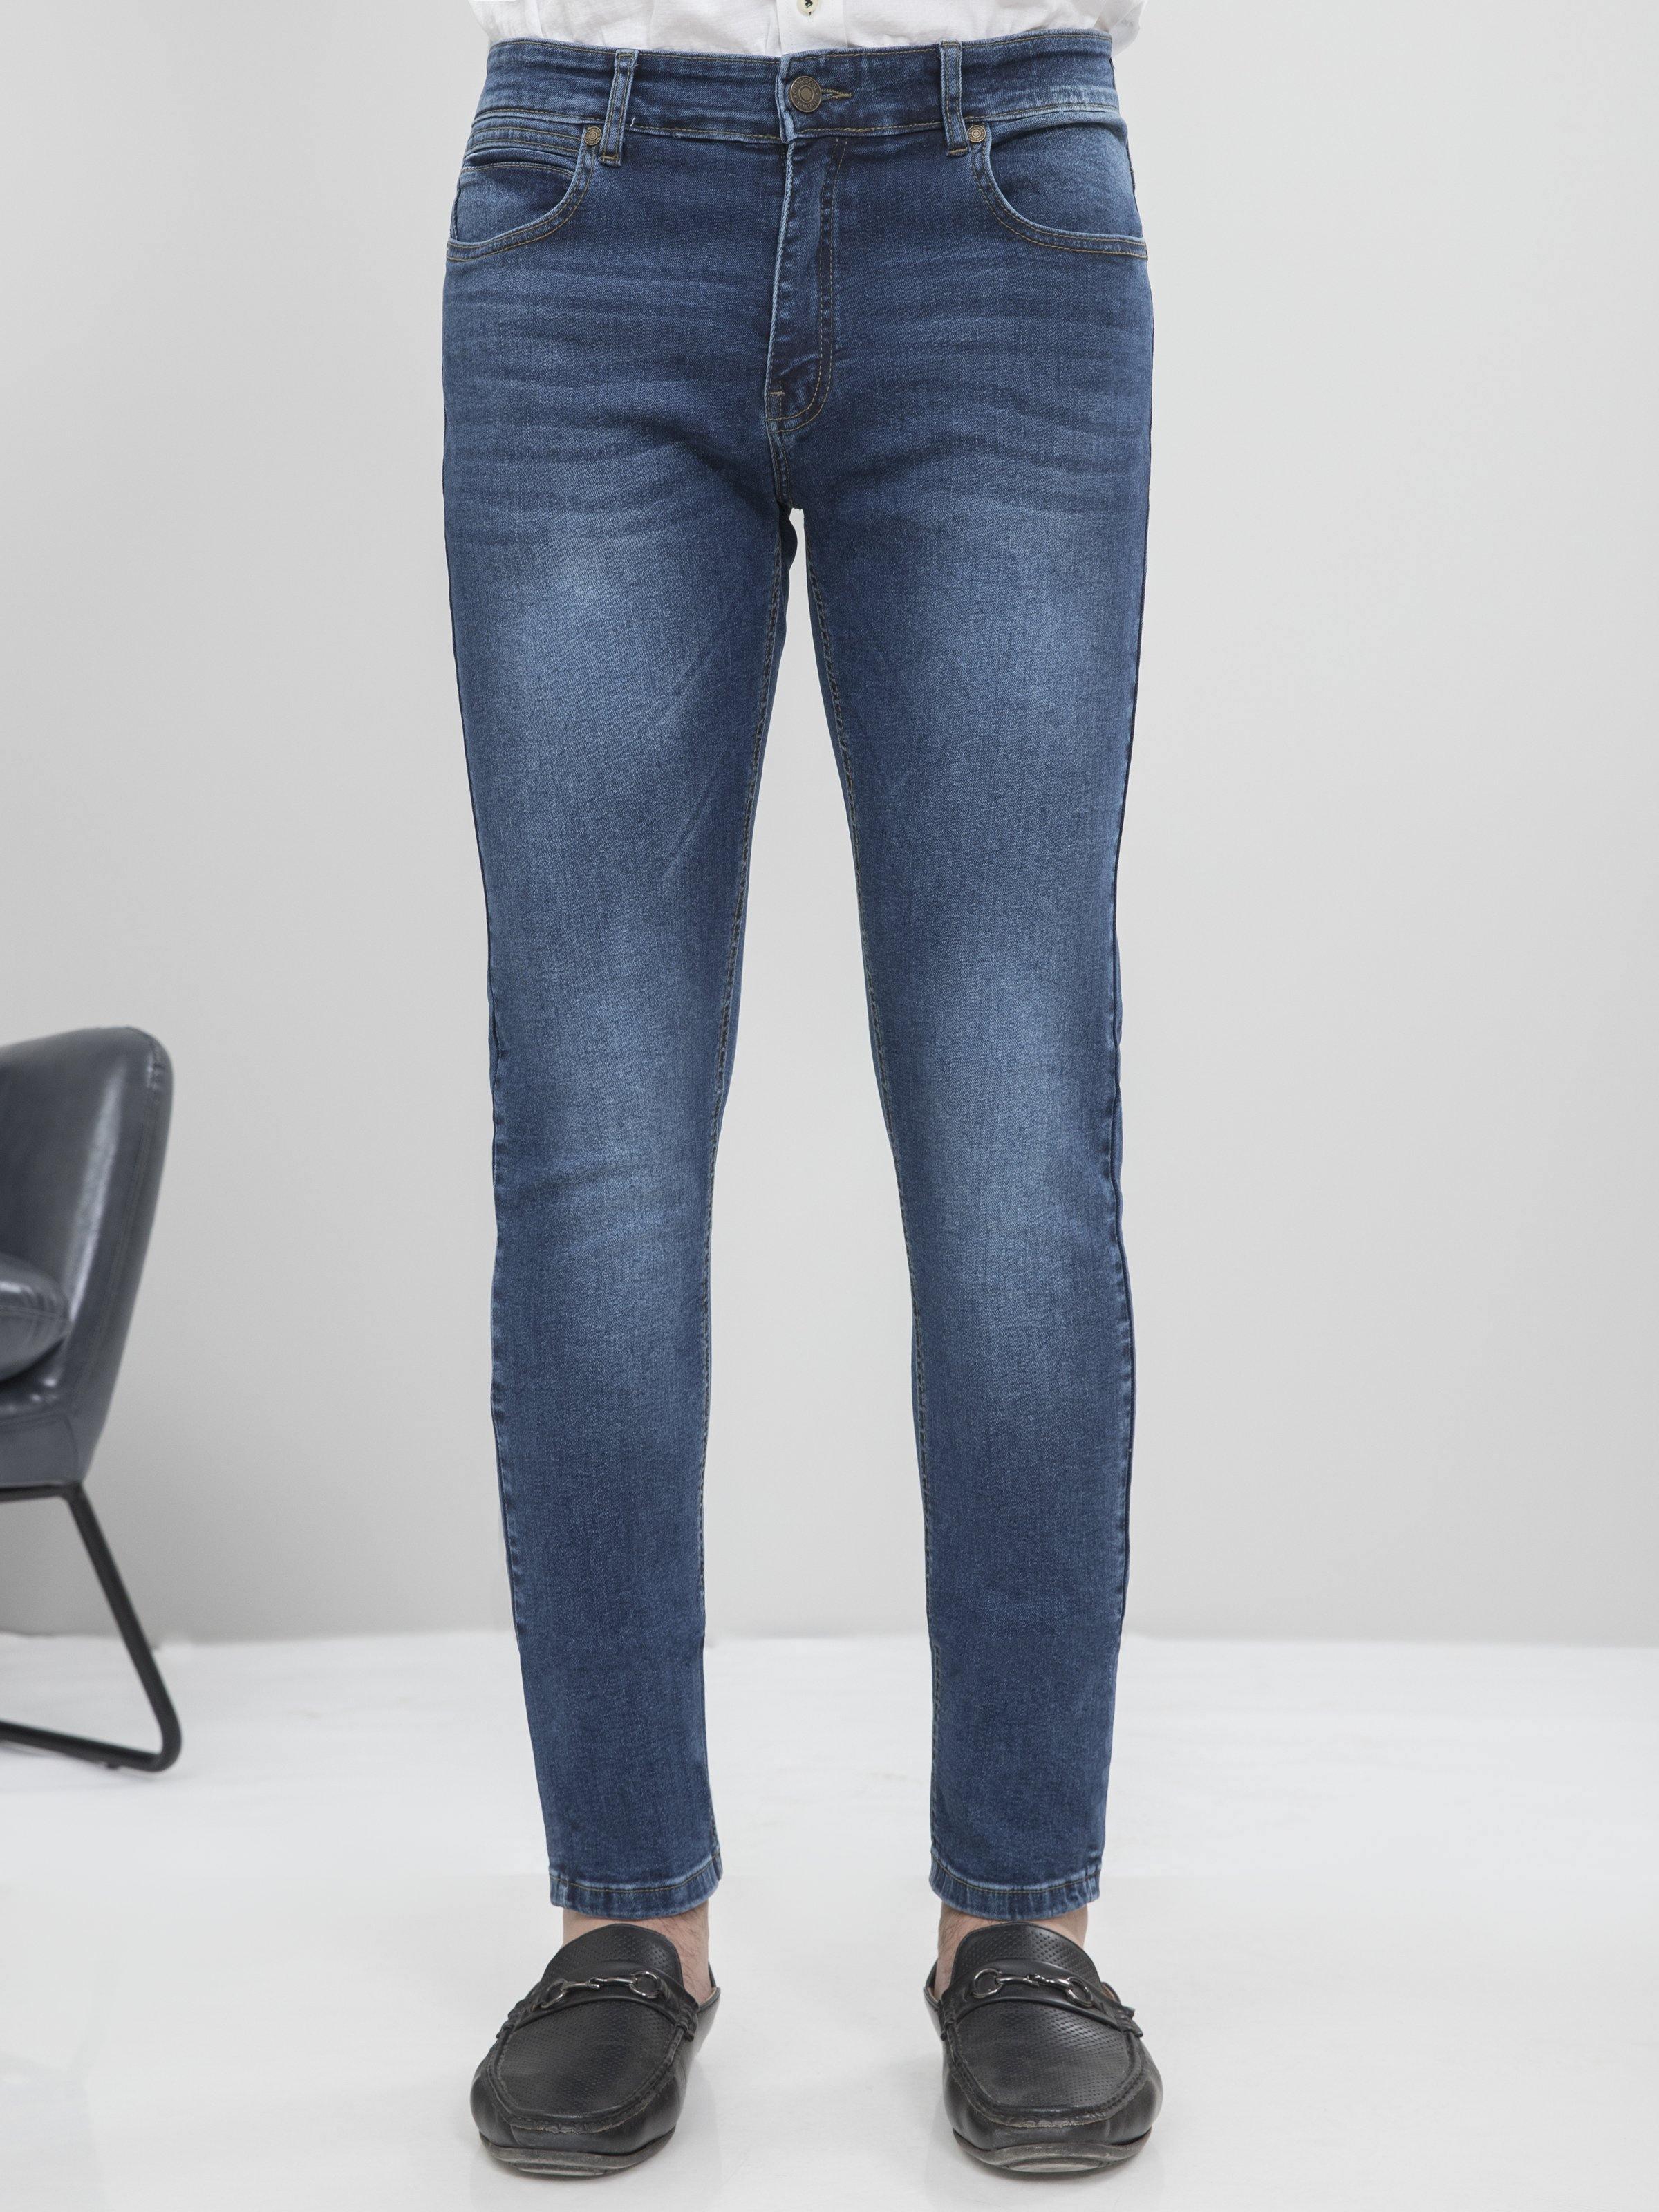 DENIM SLIM FIT JEANS at Charcoal Clothing